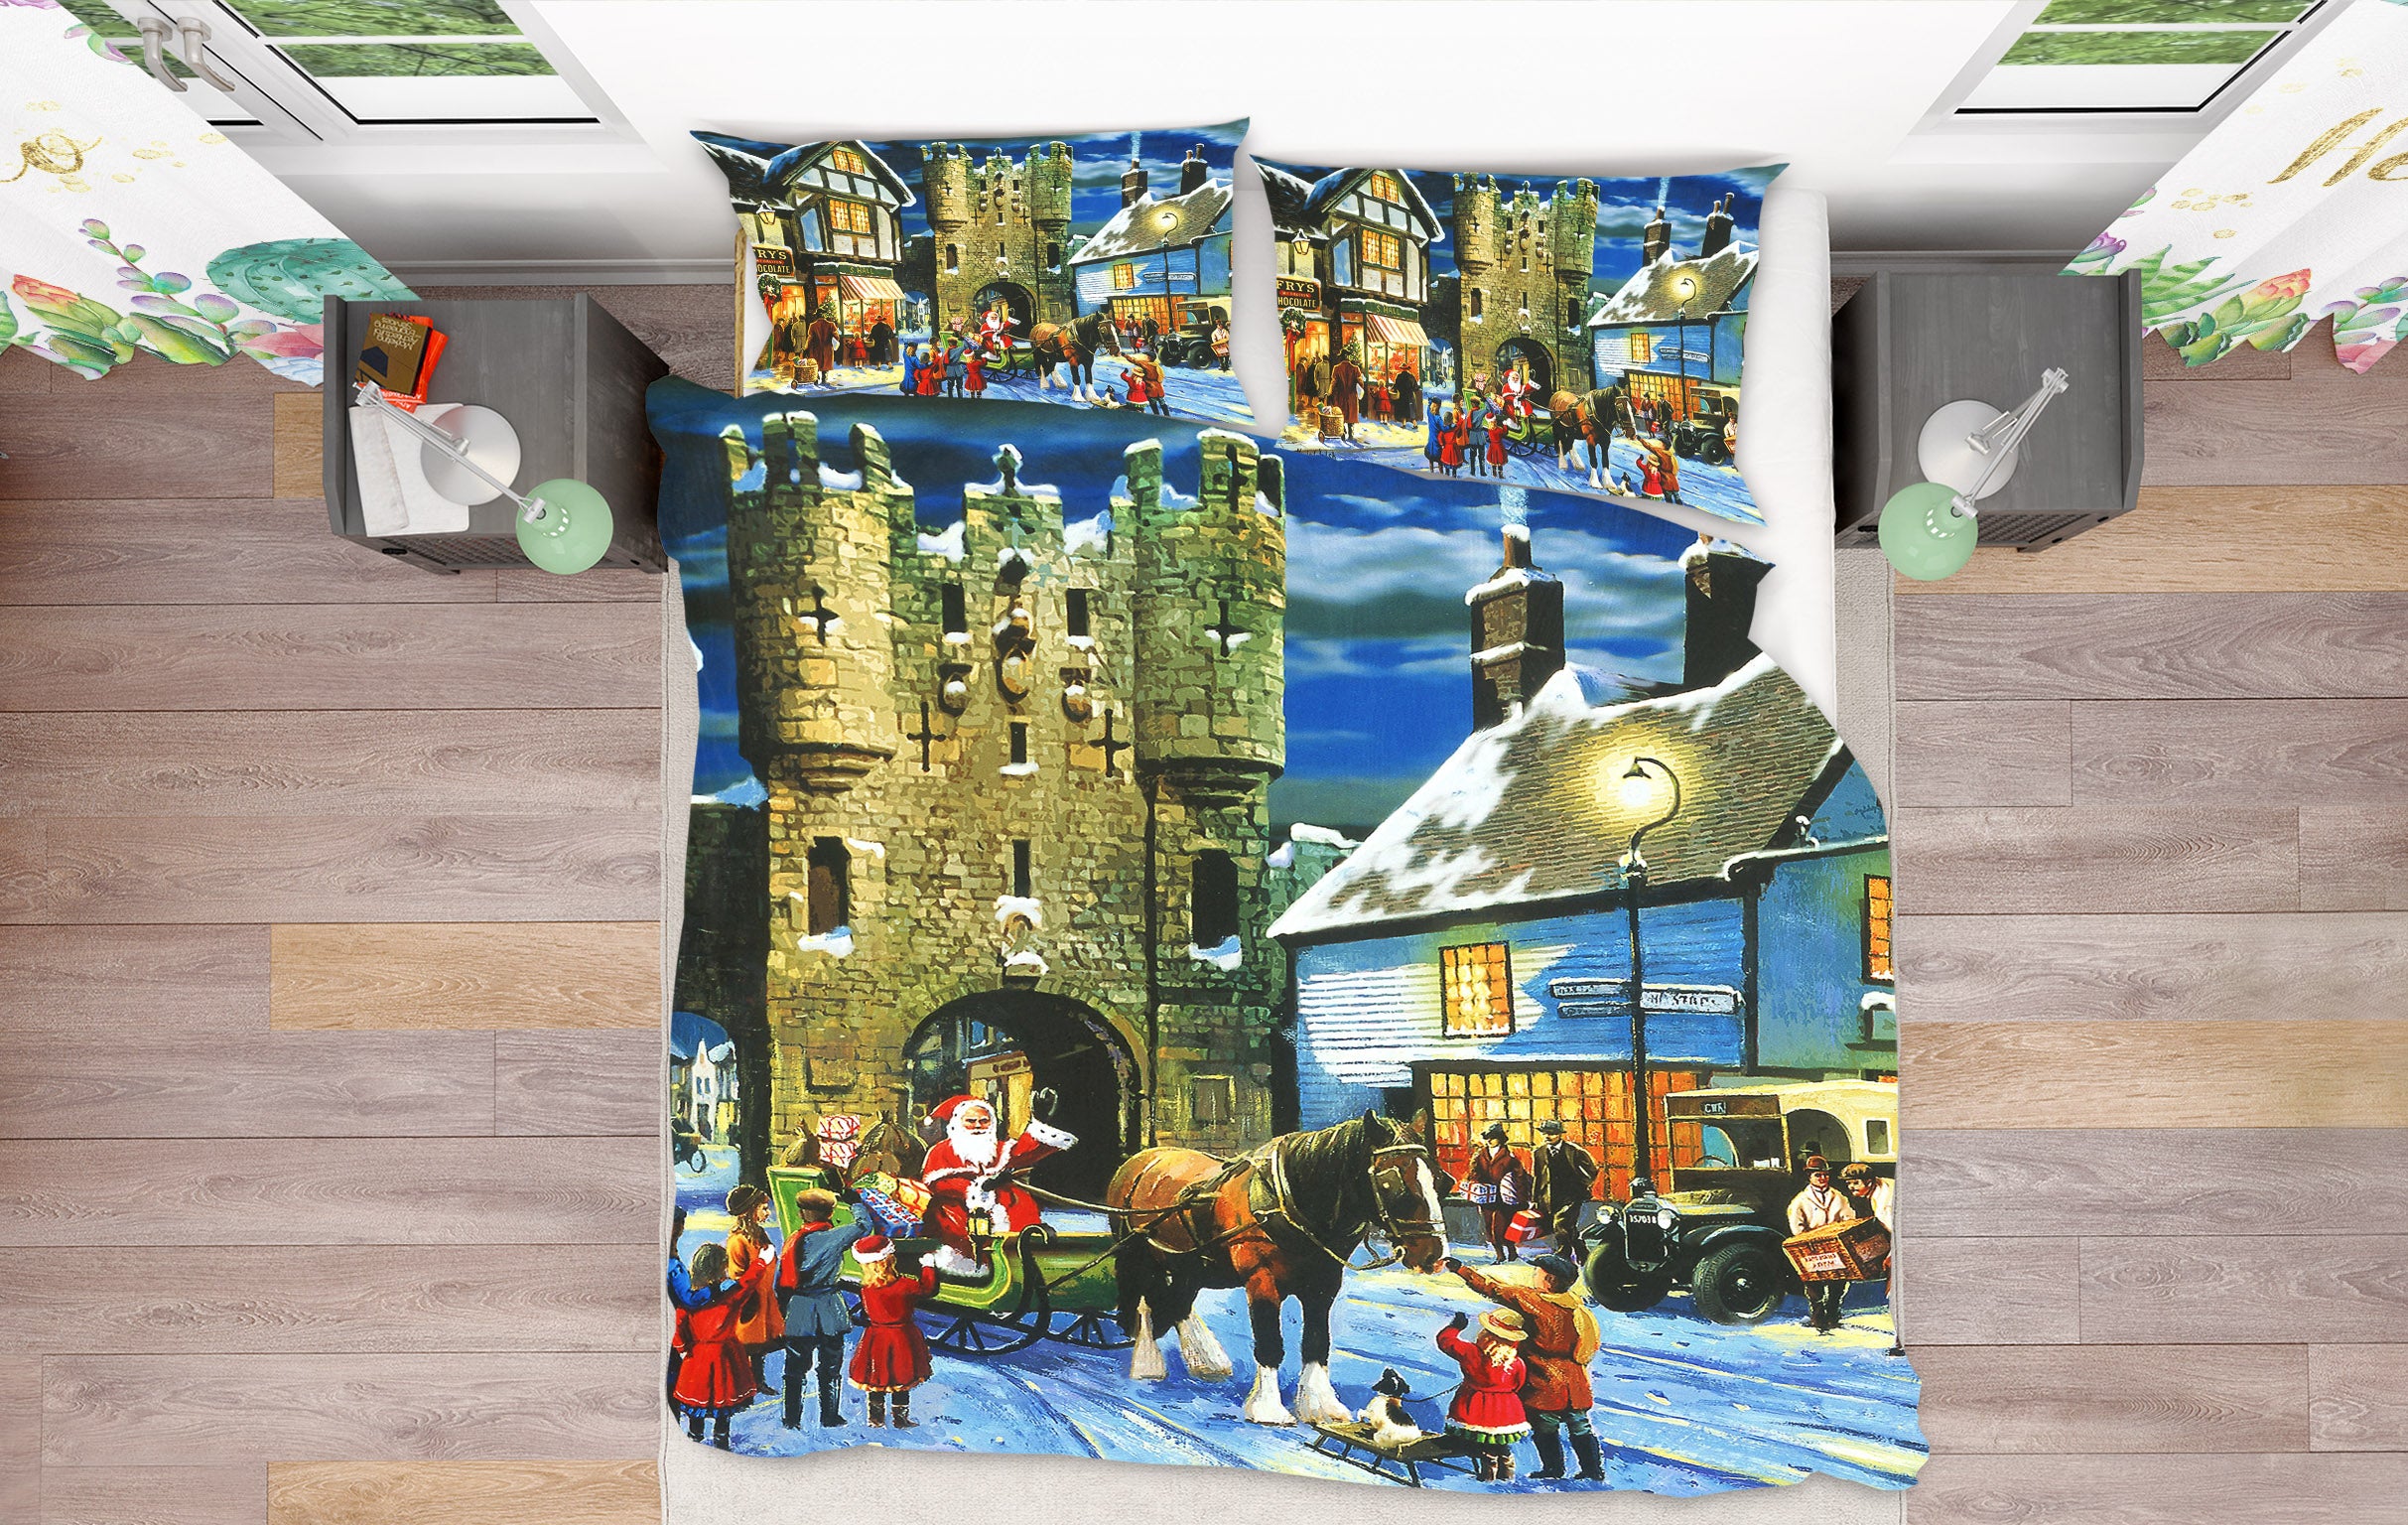 3D Christmas Sleigh 12513 Kevin Walsh Bedding Bed Pillowcases Quilt